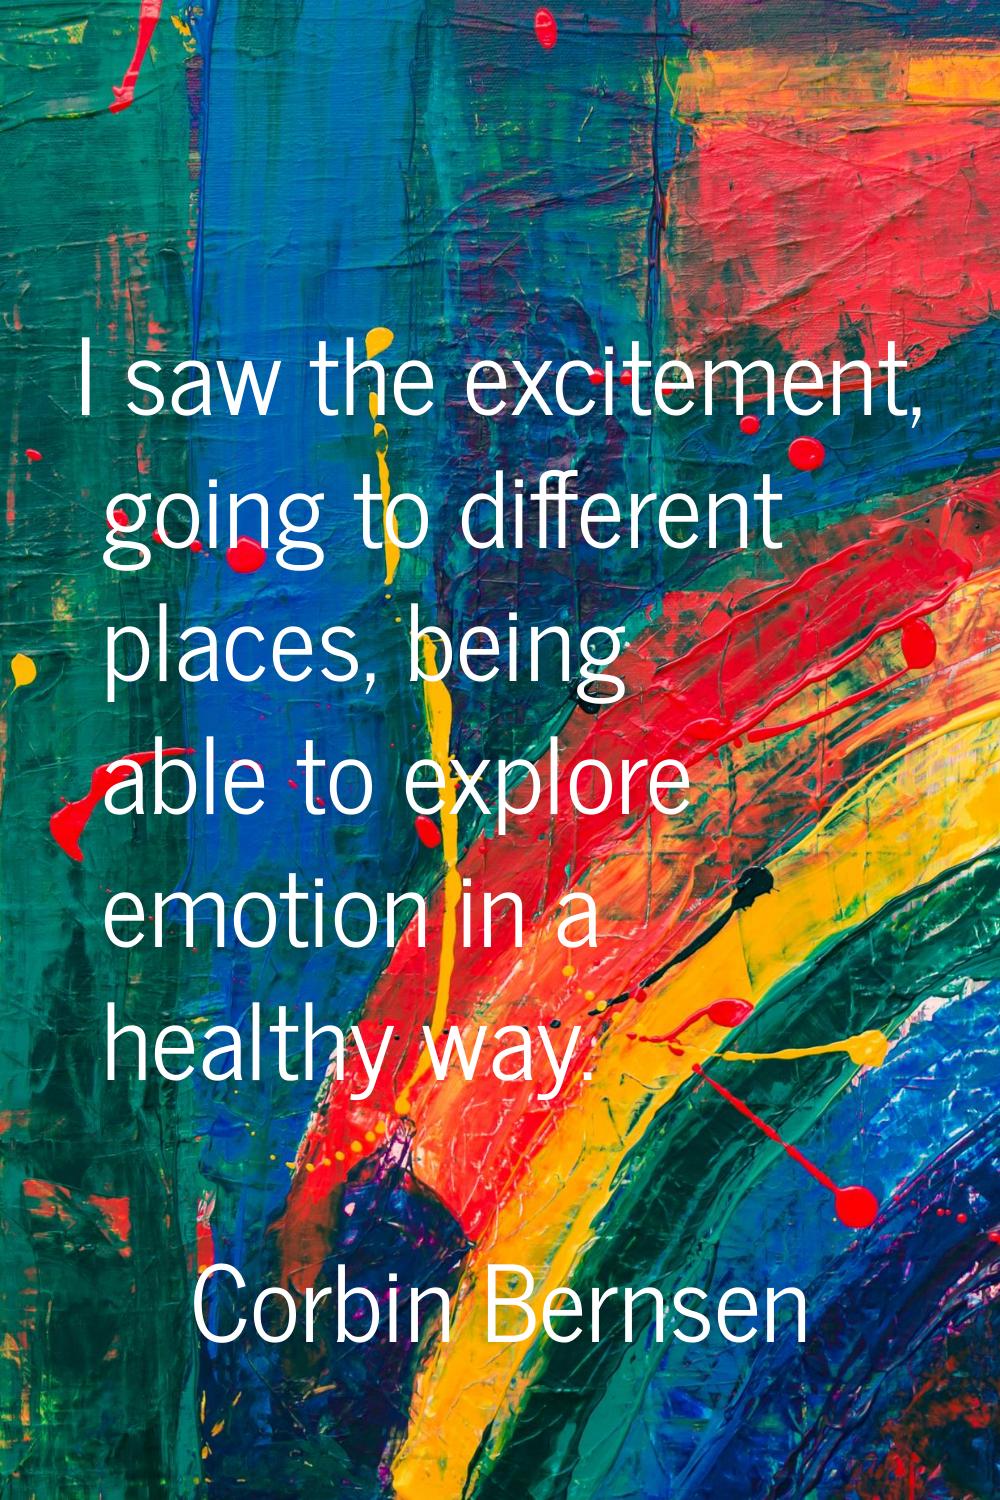 I saw the excitement, going to different places, being able to explore emotion in a healthy way.